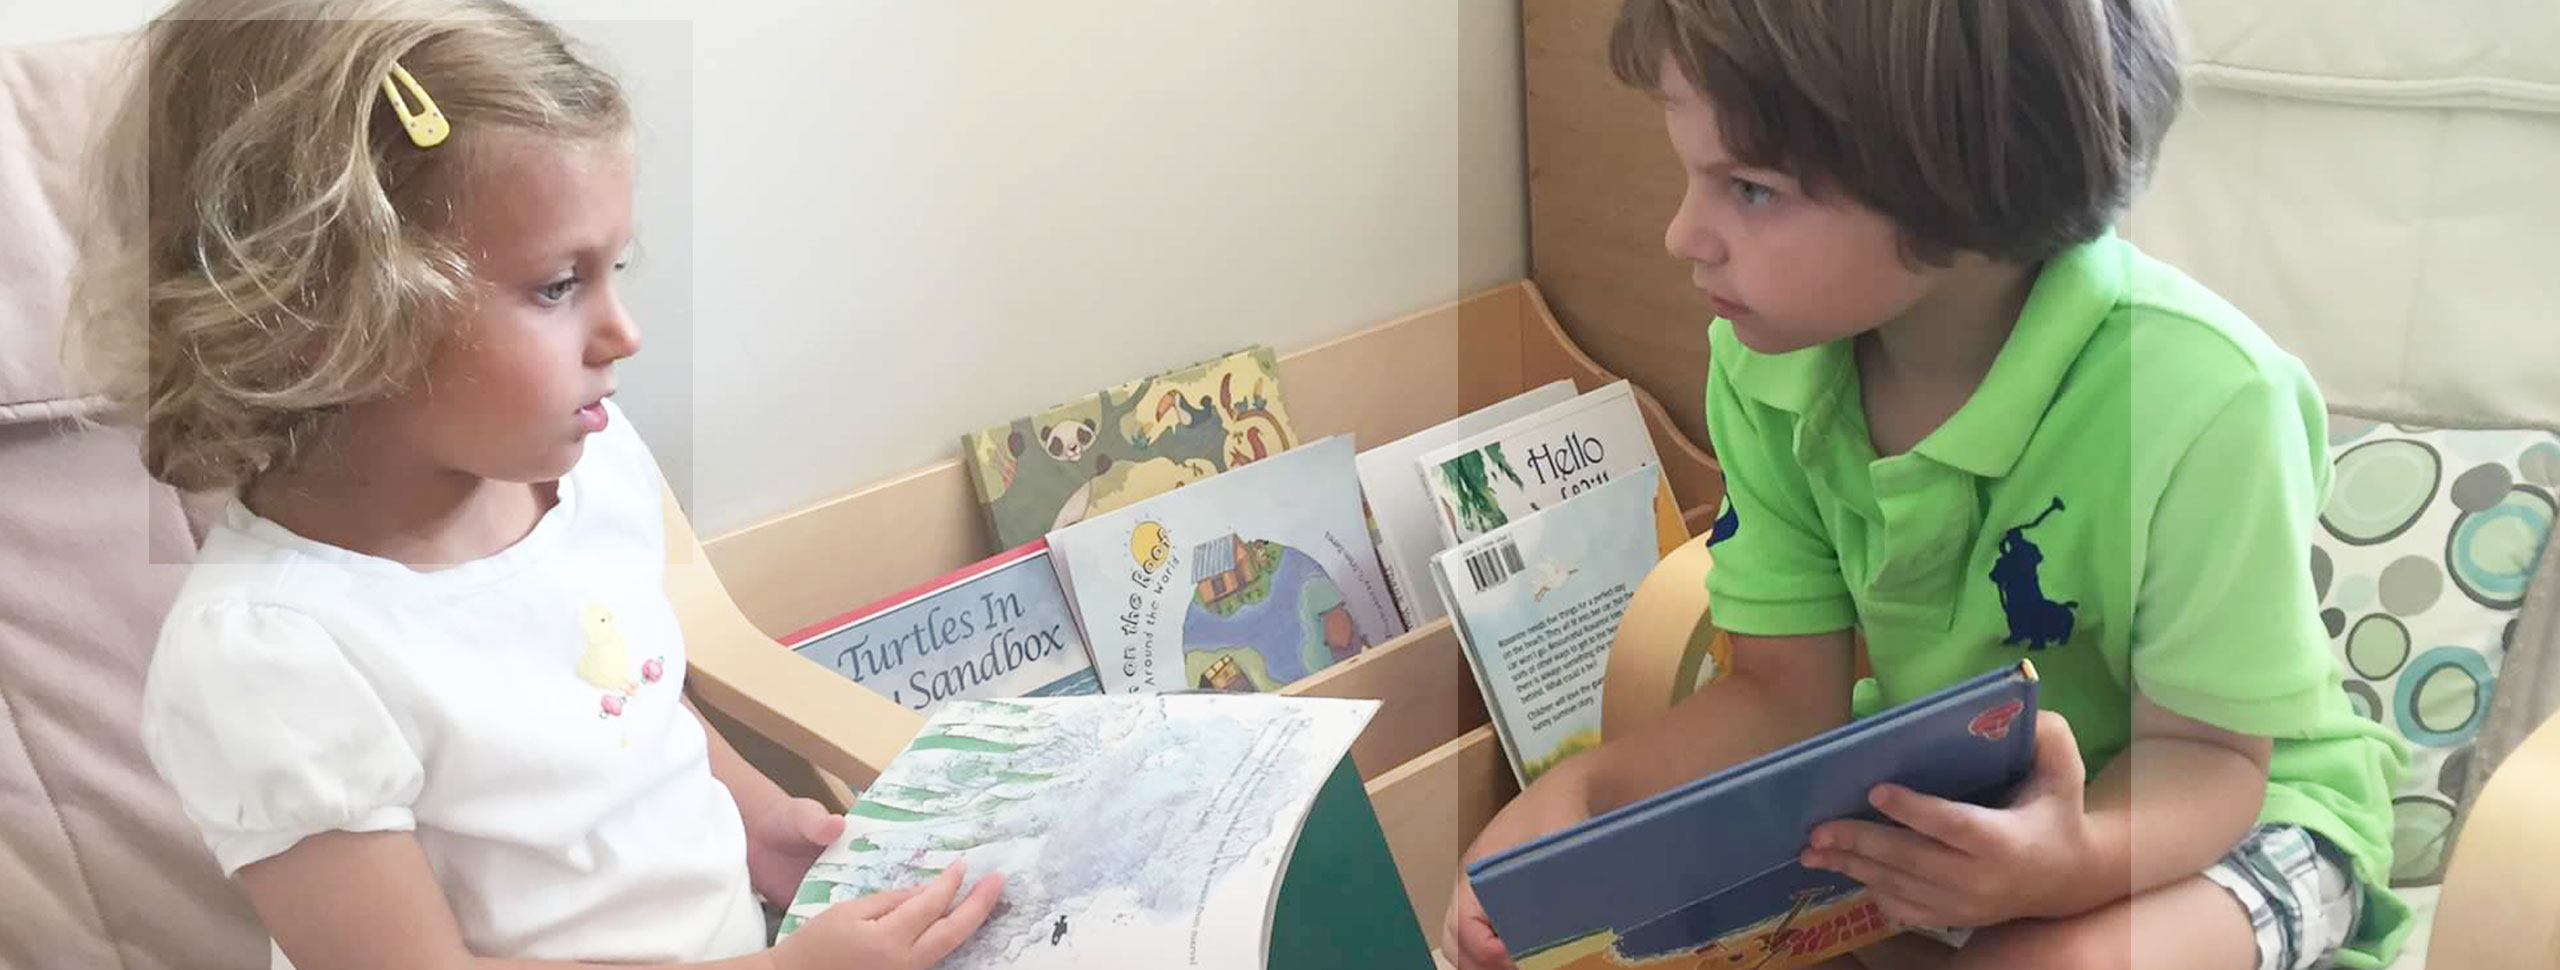 Two Montessori preschoolers read together and discuss a book.